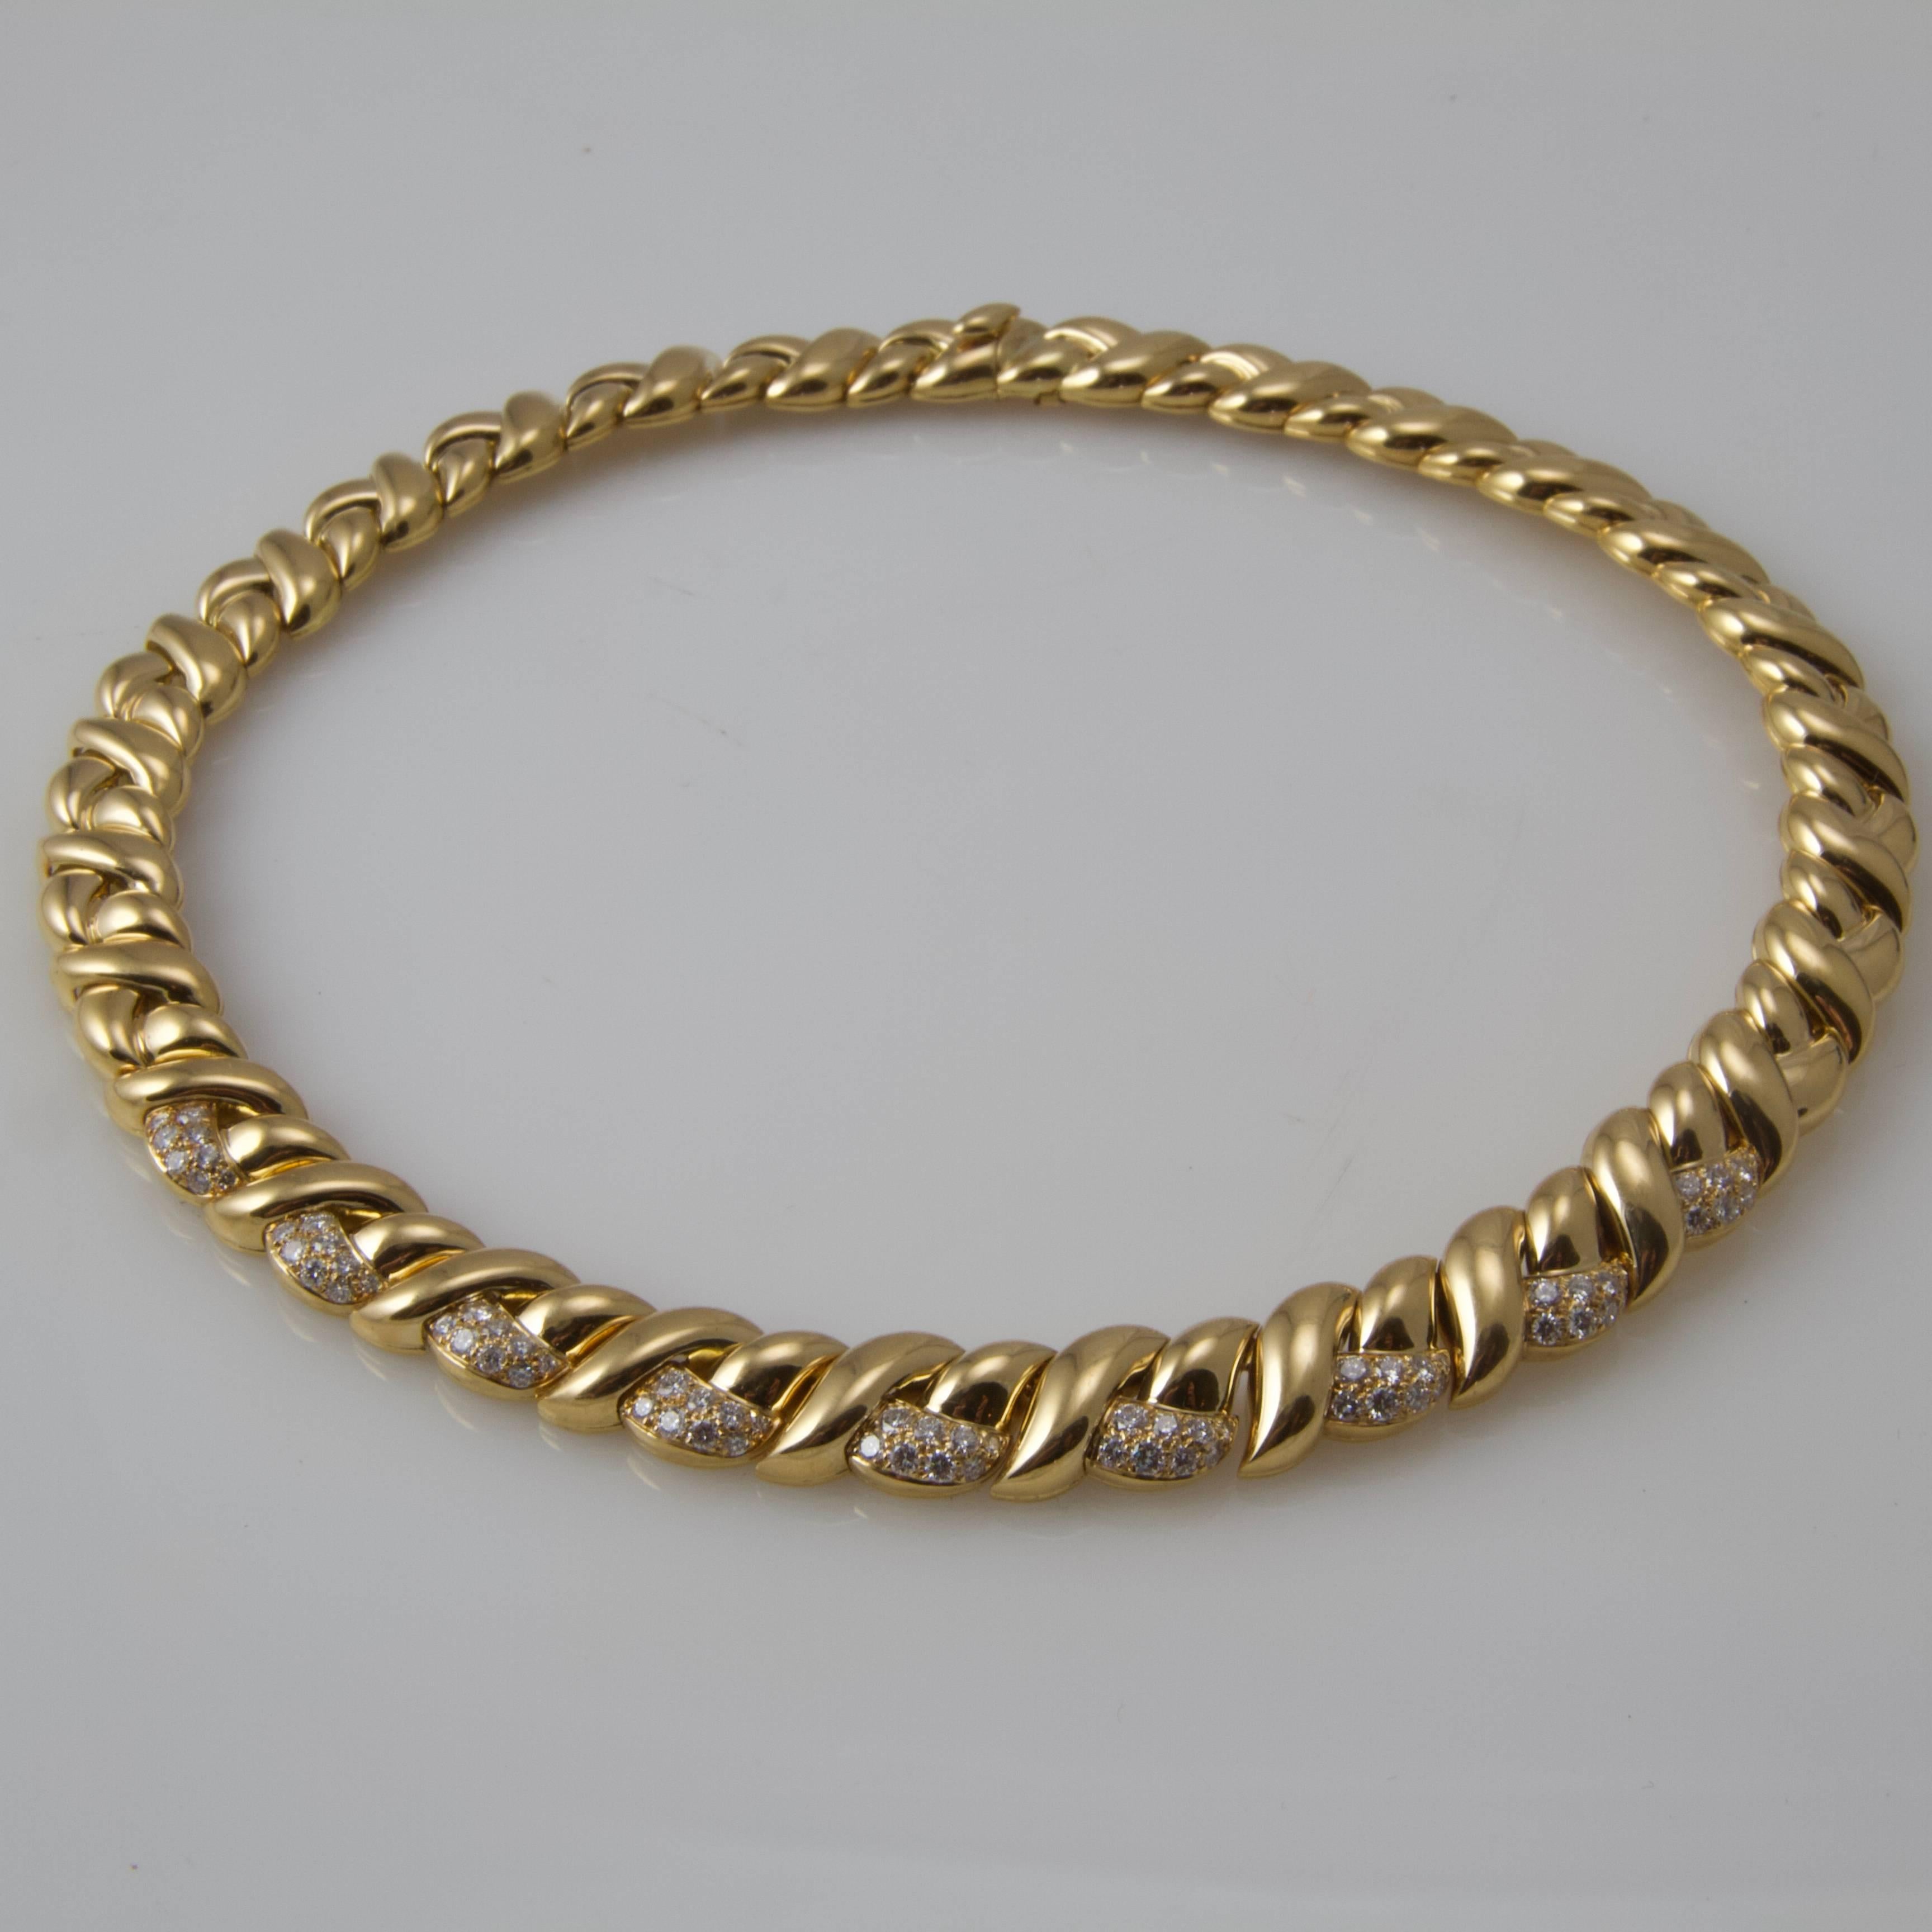 Waves pattern yellow gold and diamond necklace. 
Set on the nine central motif with round diamond (weight  2.25 carat engraved on the clasp)
Security system.
French maker's mark. 
French assays marks for 18kt.  
Signed on the clasp by Van Cleef &